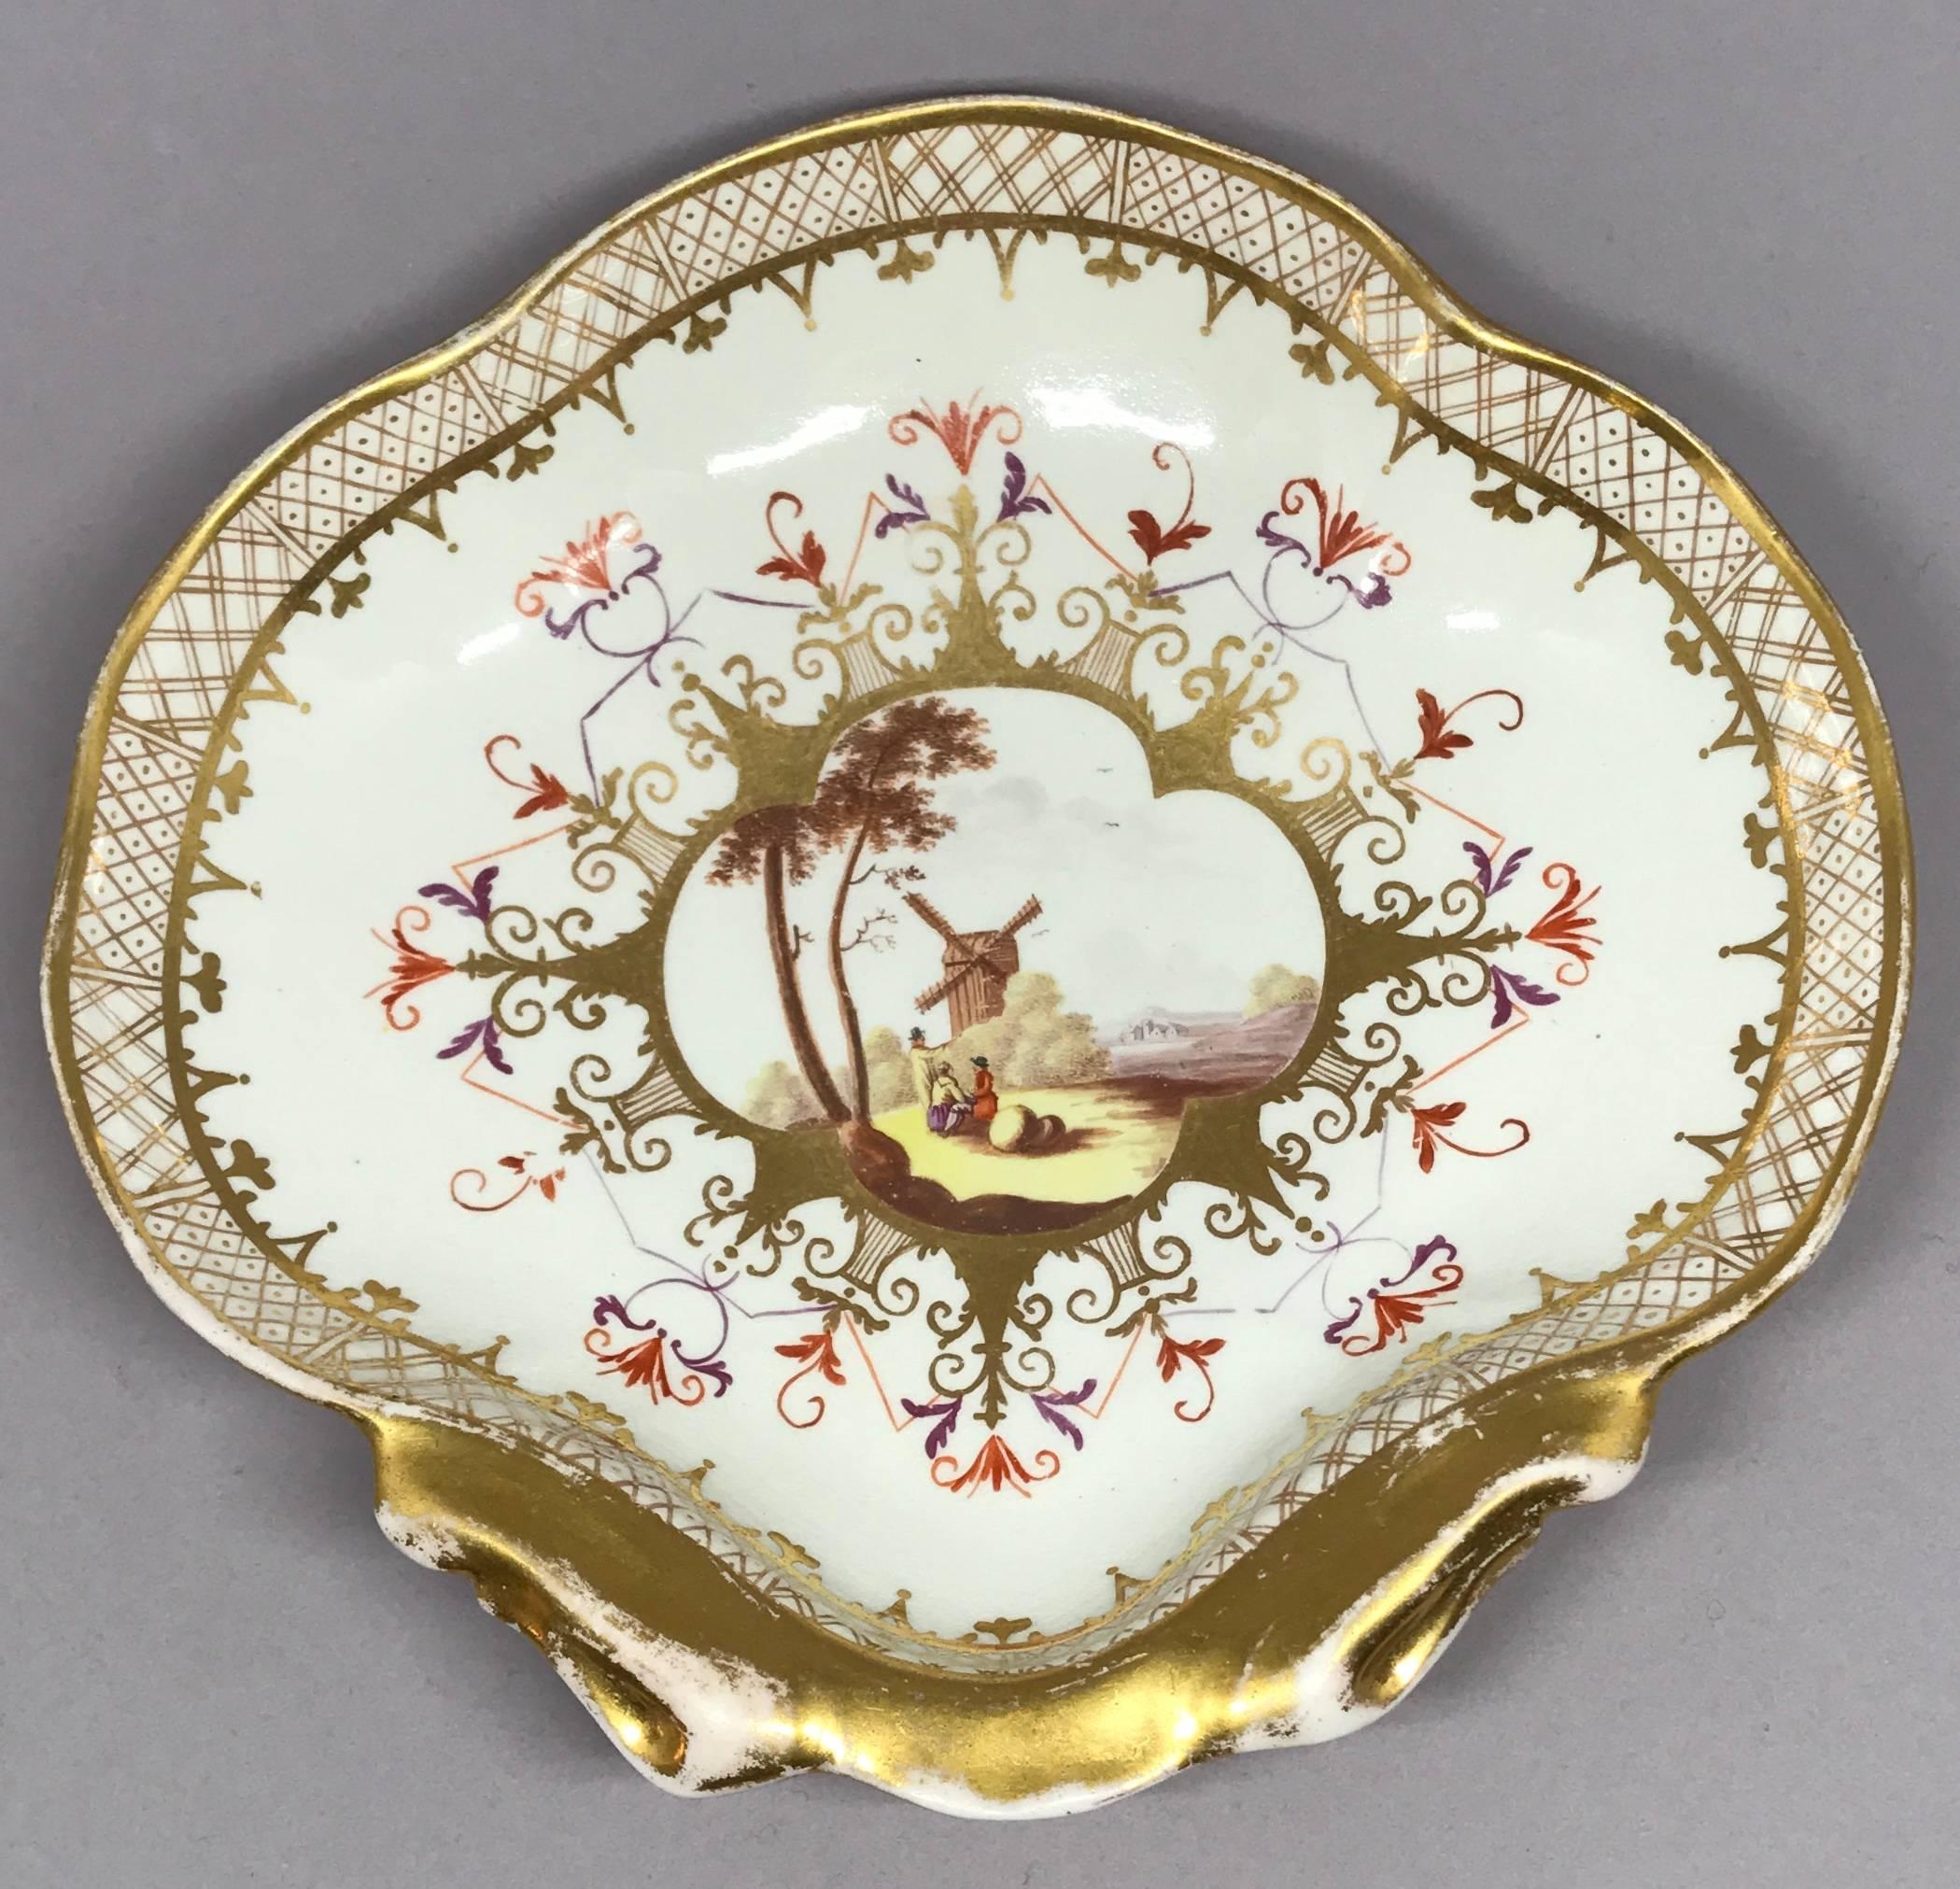 English iron red and gilt shell form serving dish after Meissen.  English chinoiserie shell form dish after Meissen. A rare coal port gilt porcelain sweetmeat plate decorated in the Meissen style with figures in a Dutch landscape painted in iron red